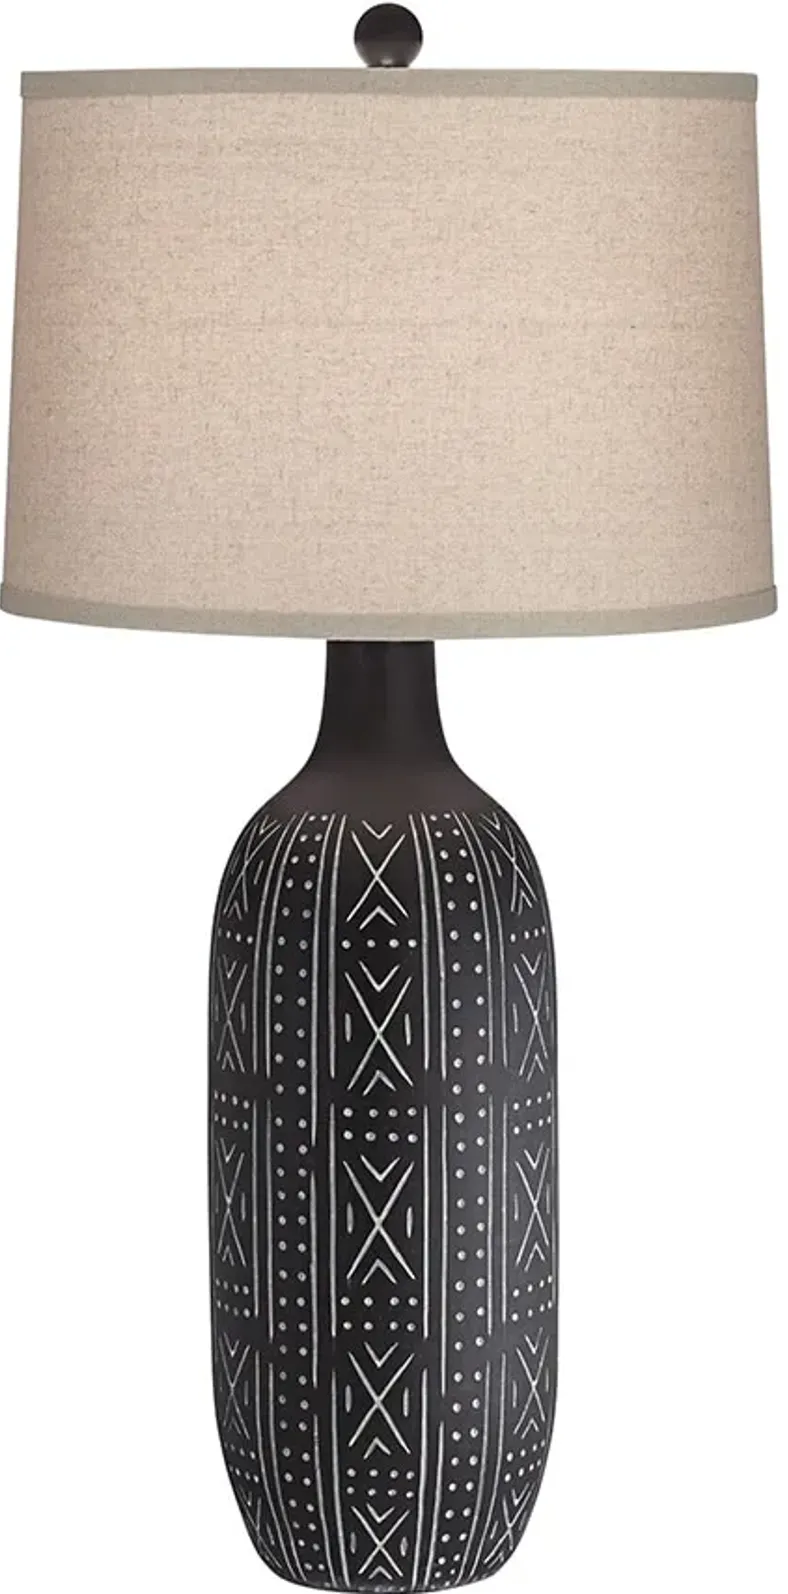 Starr Table Lamp